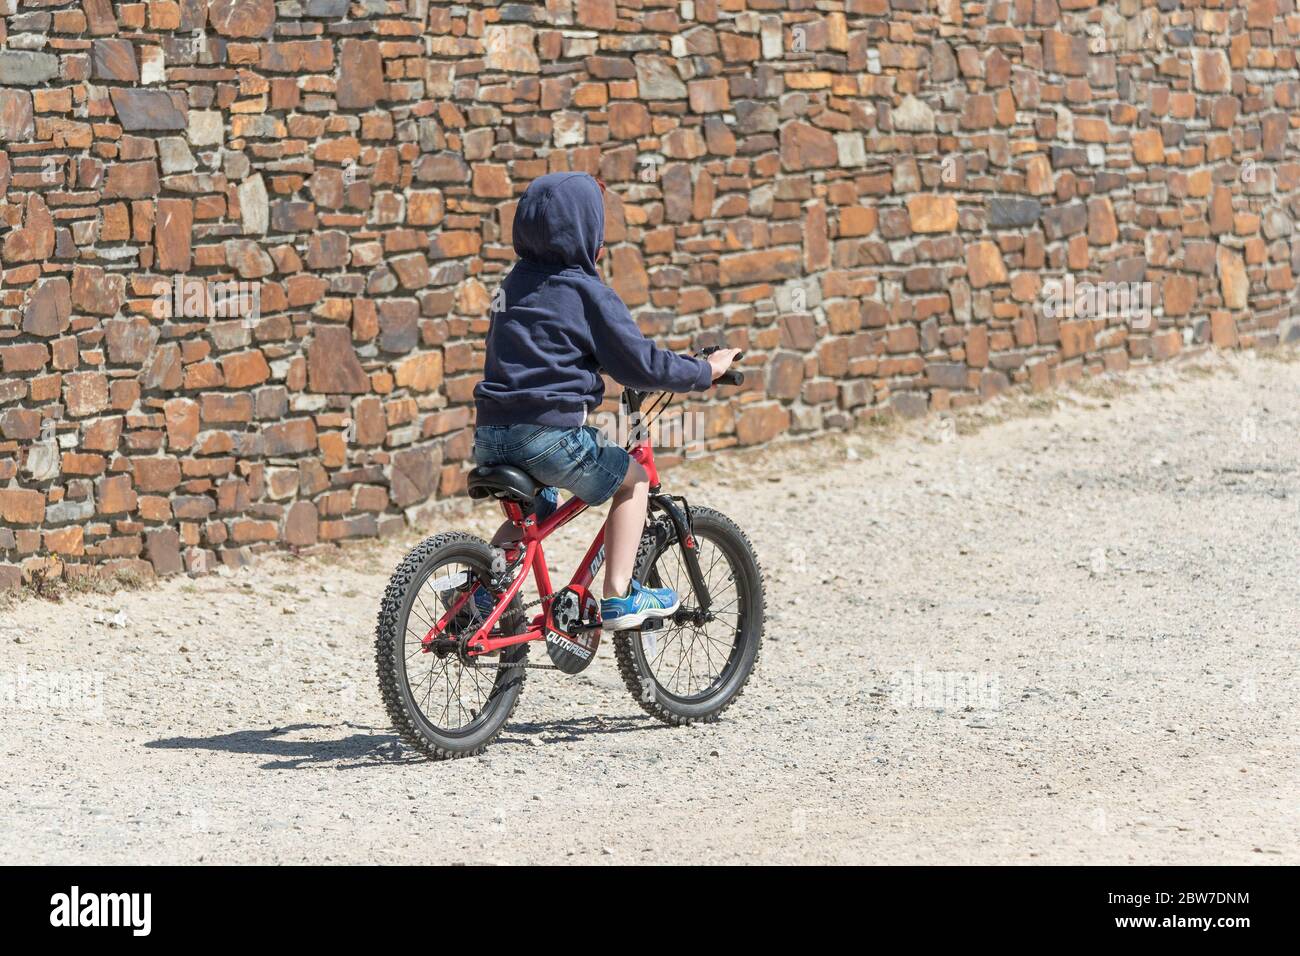 A young boy wearing a hoodie riding his bicycle. Stock Photo